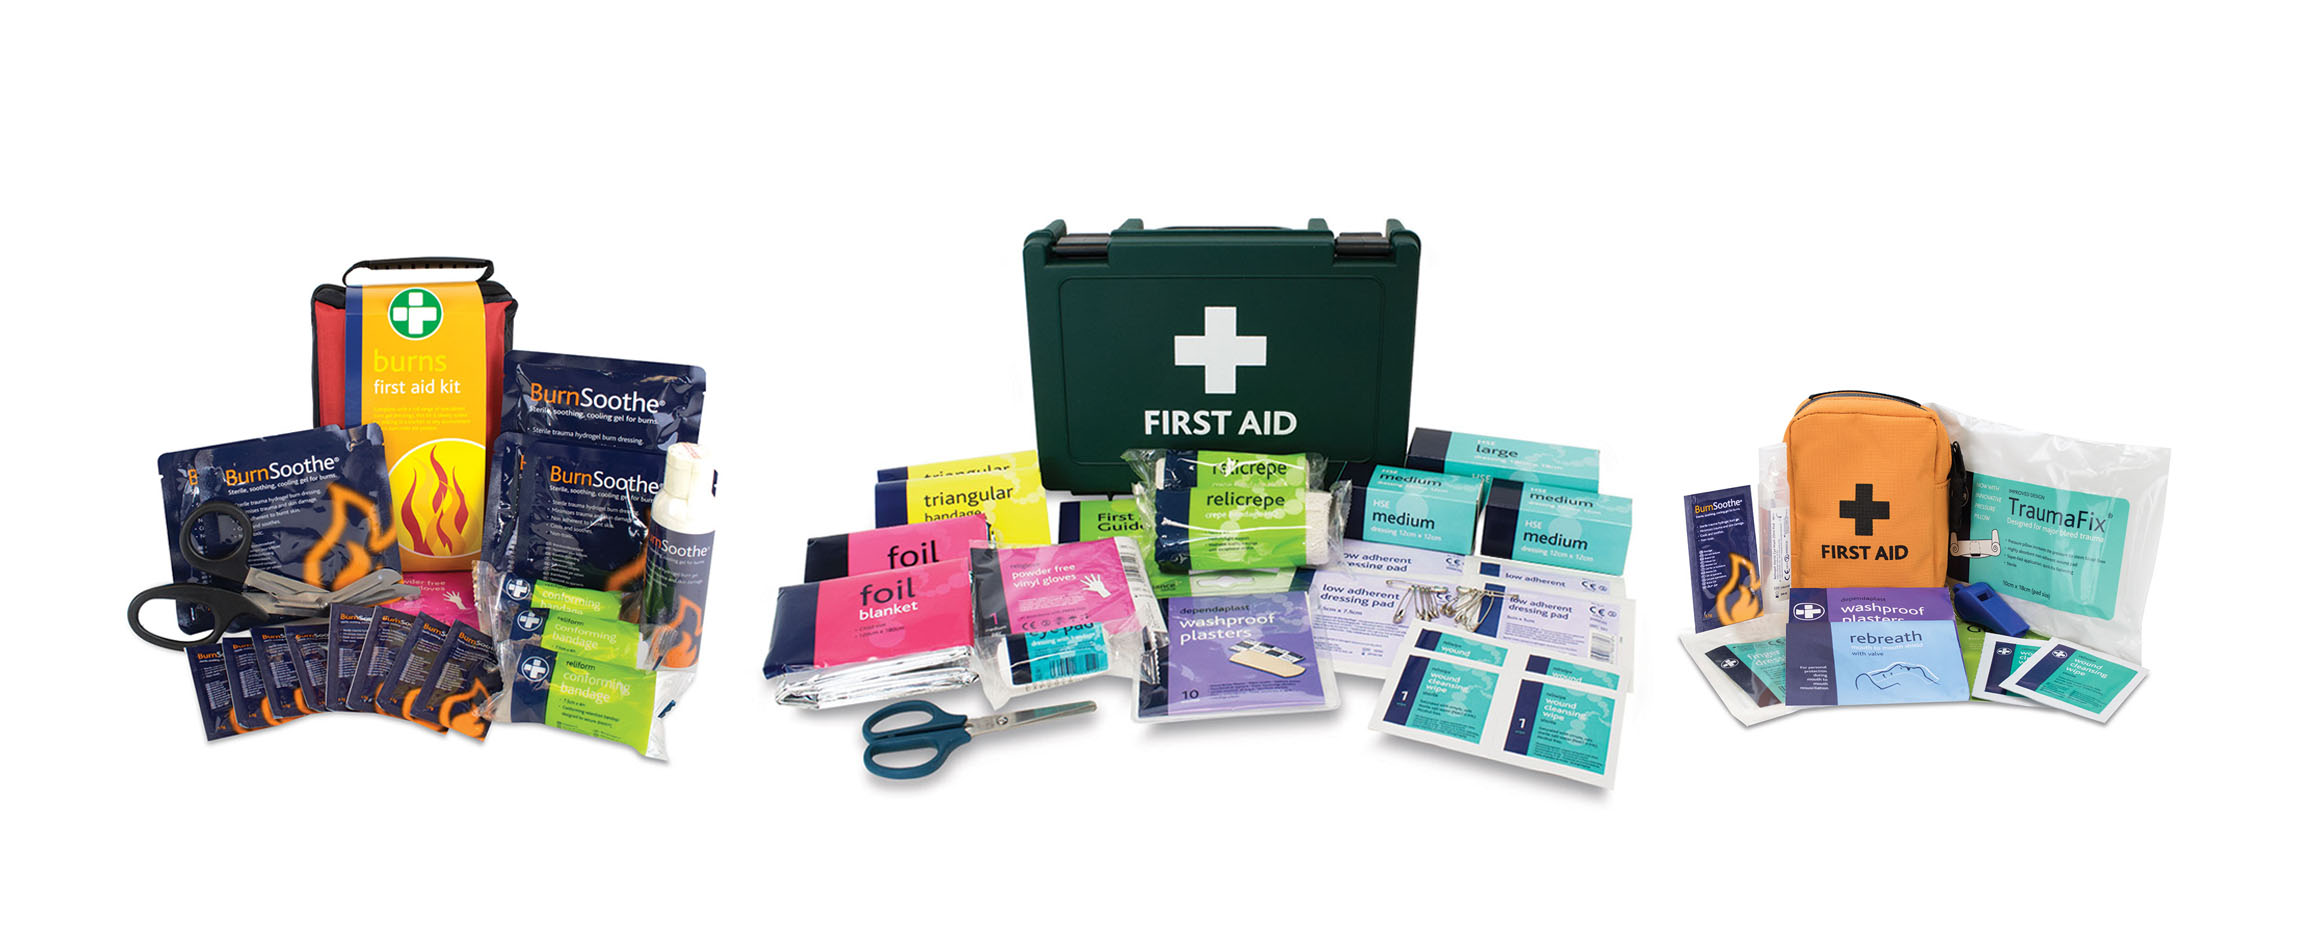 Variety of first aid kits with different sizes